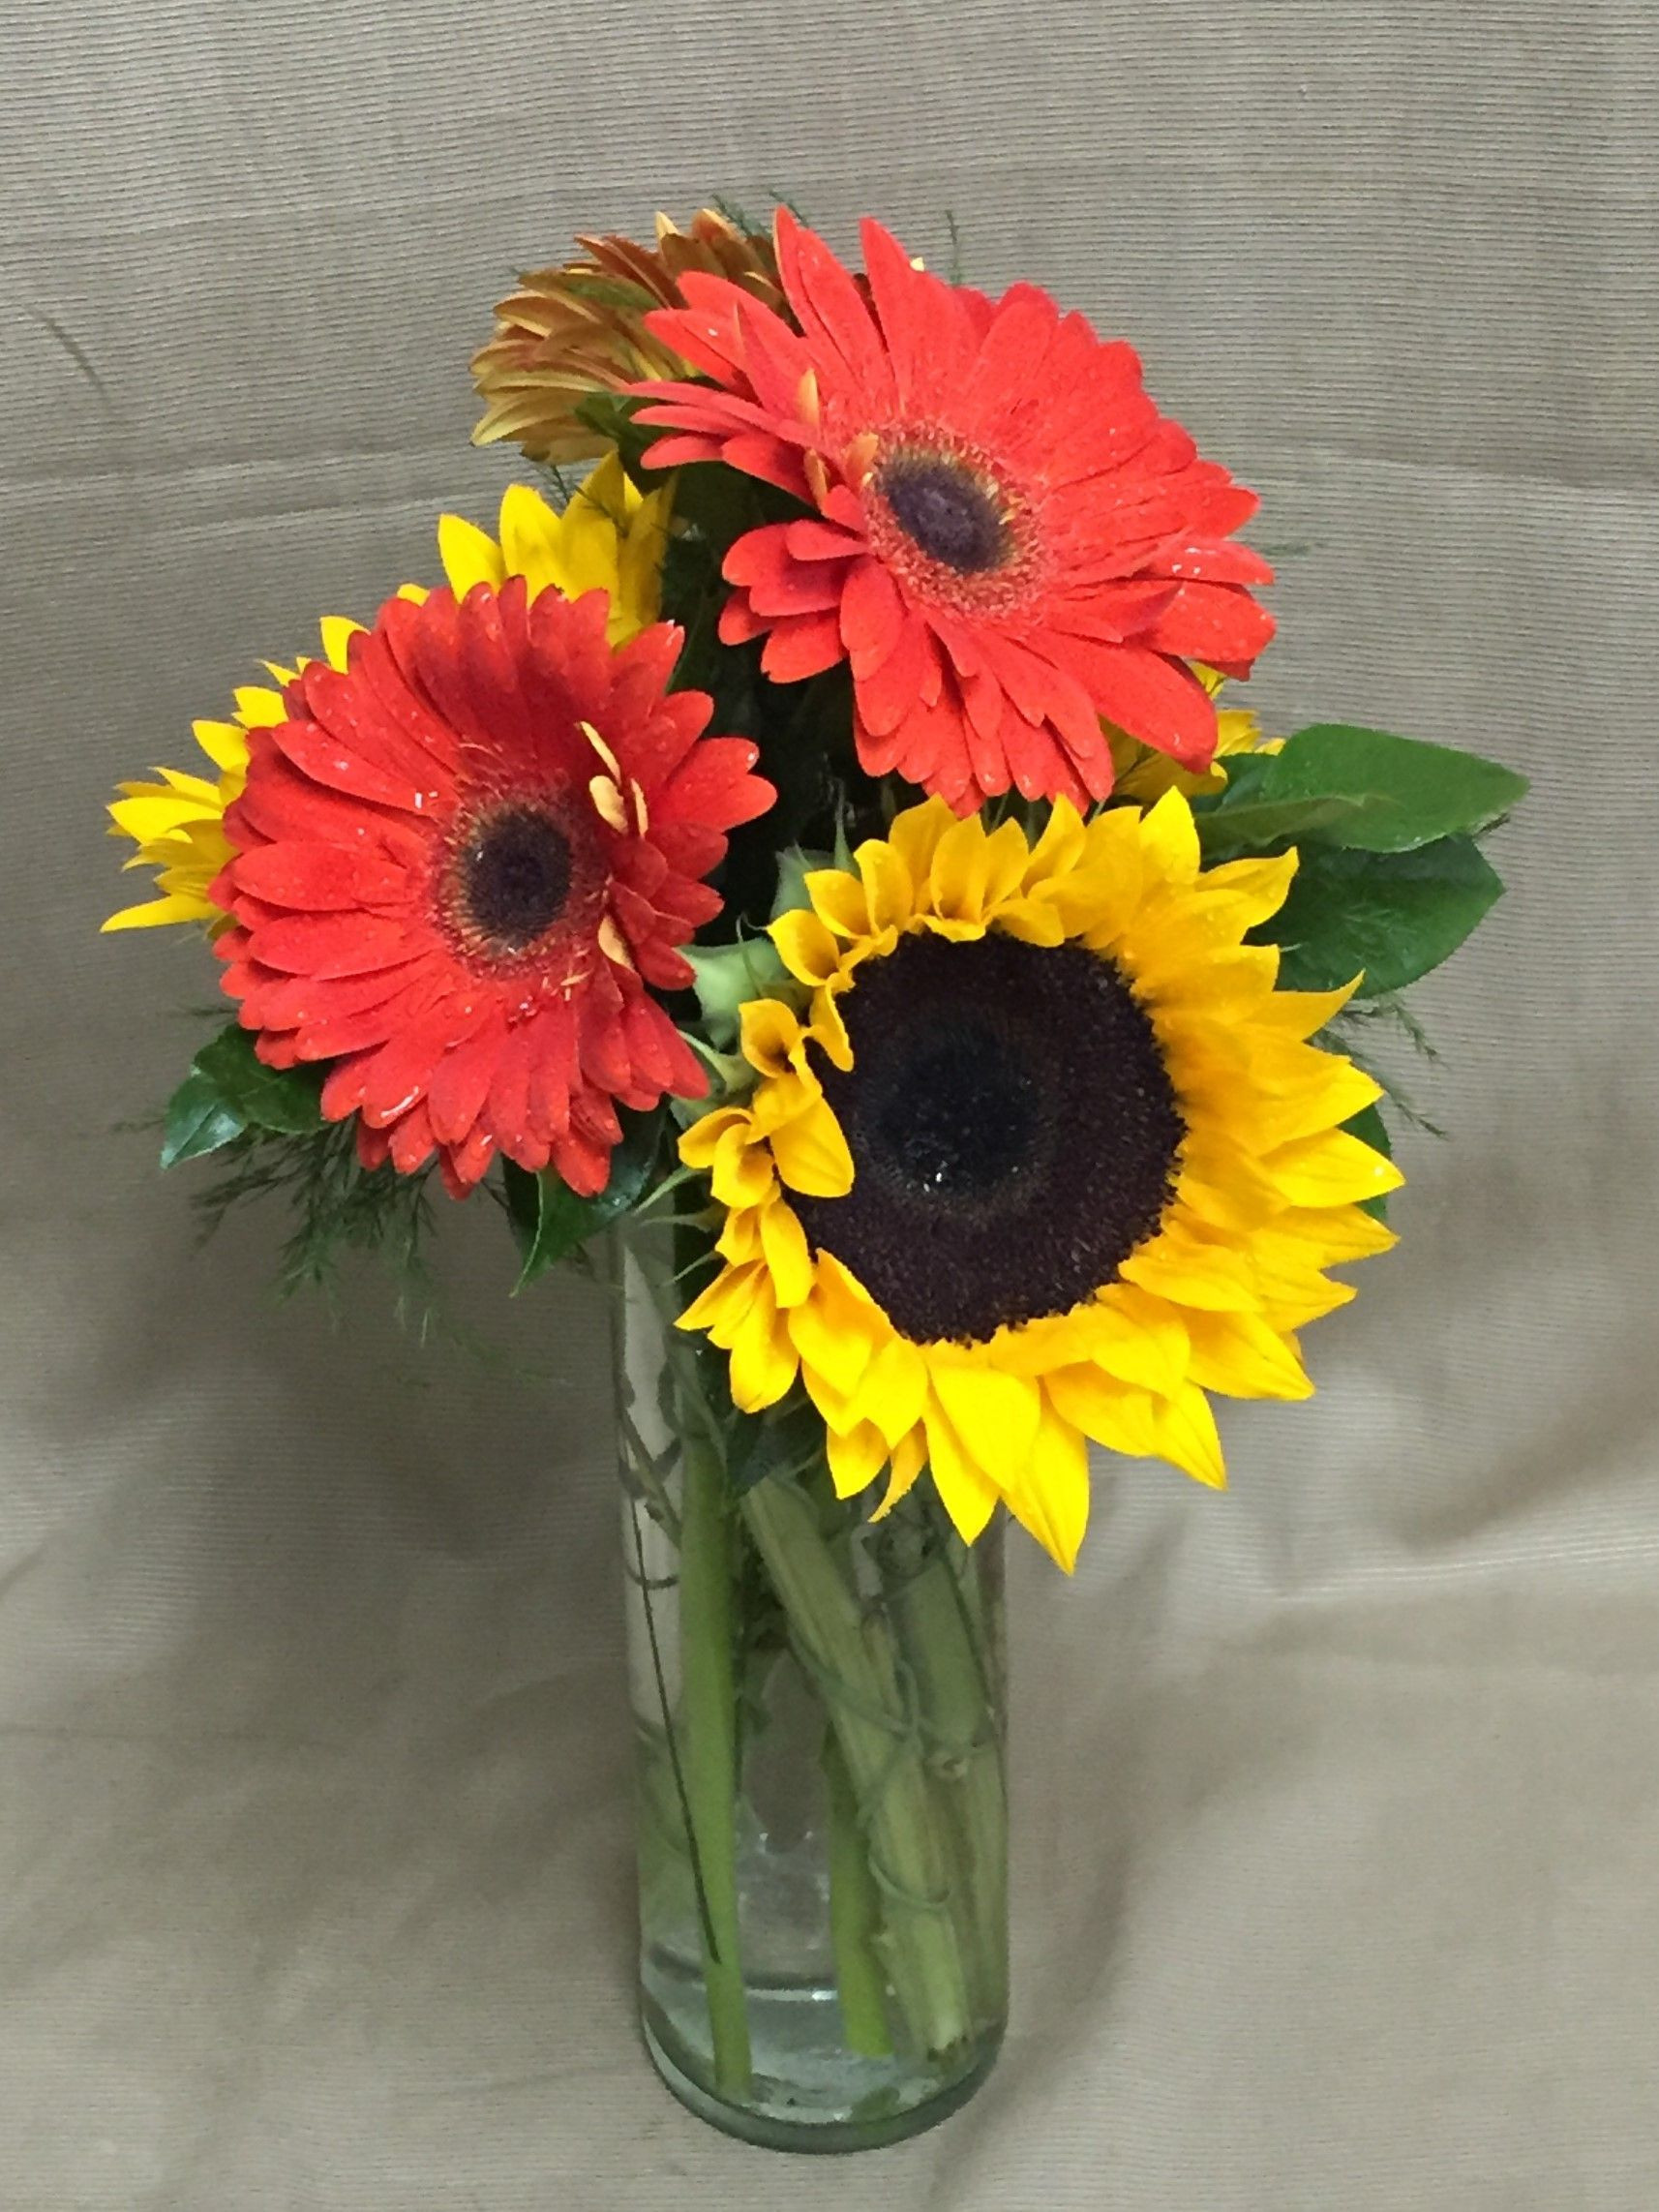 19 Awesome Daisies In A Vase 2024 free download daisies in a vase of brilliant birthday yellow sunflowers orange gerbera daisies salal in brilliant birthday yellow sunflowers orange gerbera daisies salal and tree fern in a tall cylinder v